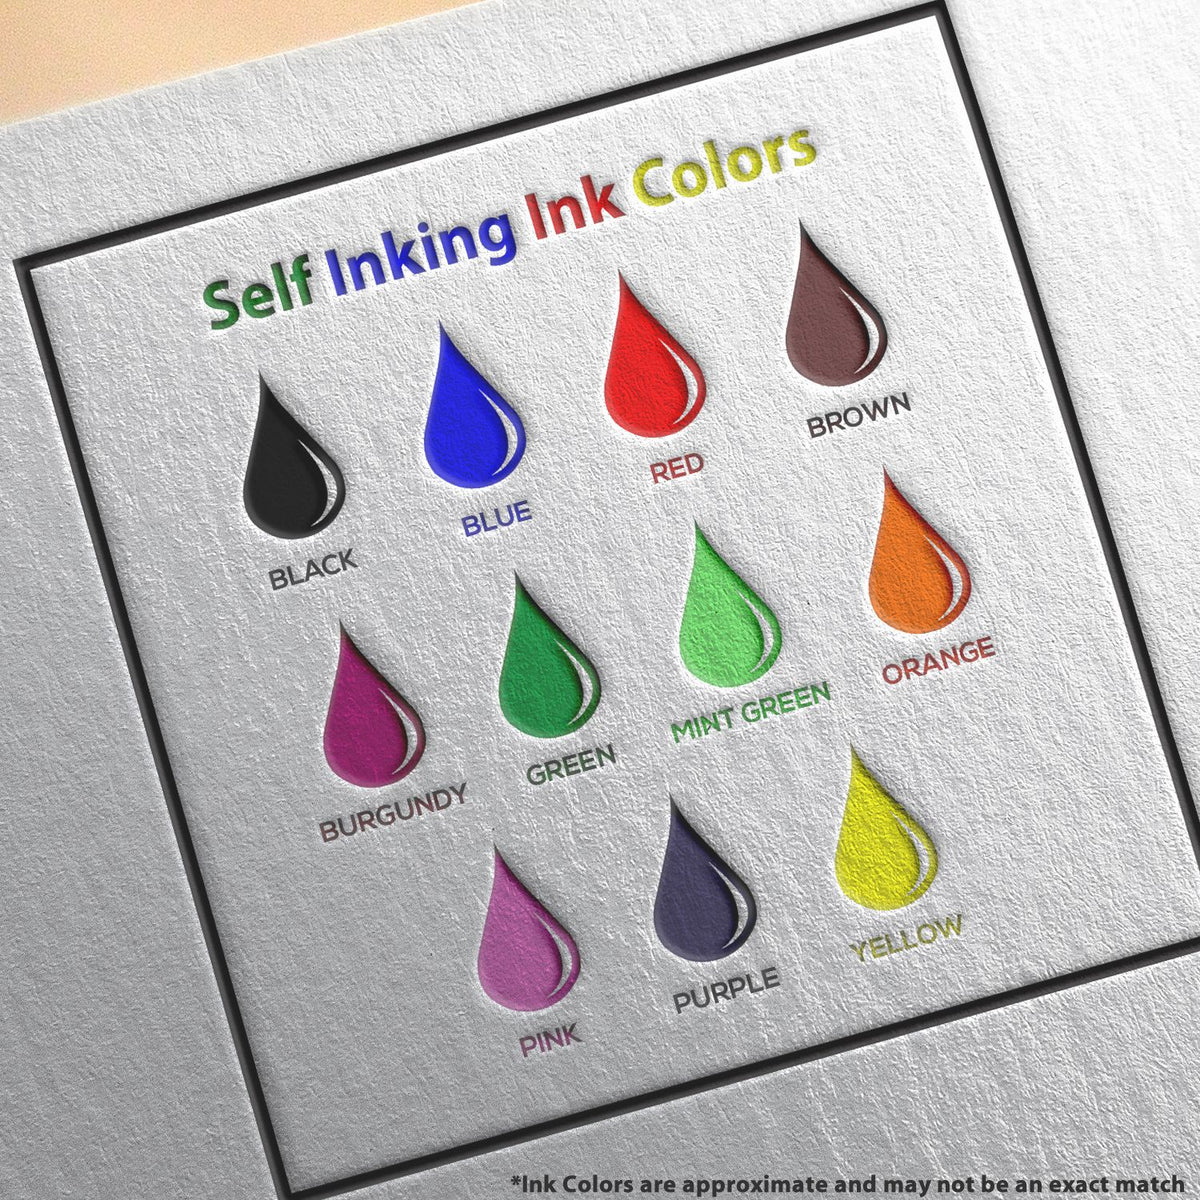 A picture showing the different ink colors or hues available for the Heavy-Duty Kansas Rectangular Notary Stamp product.